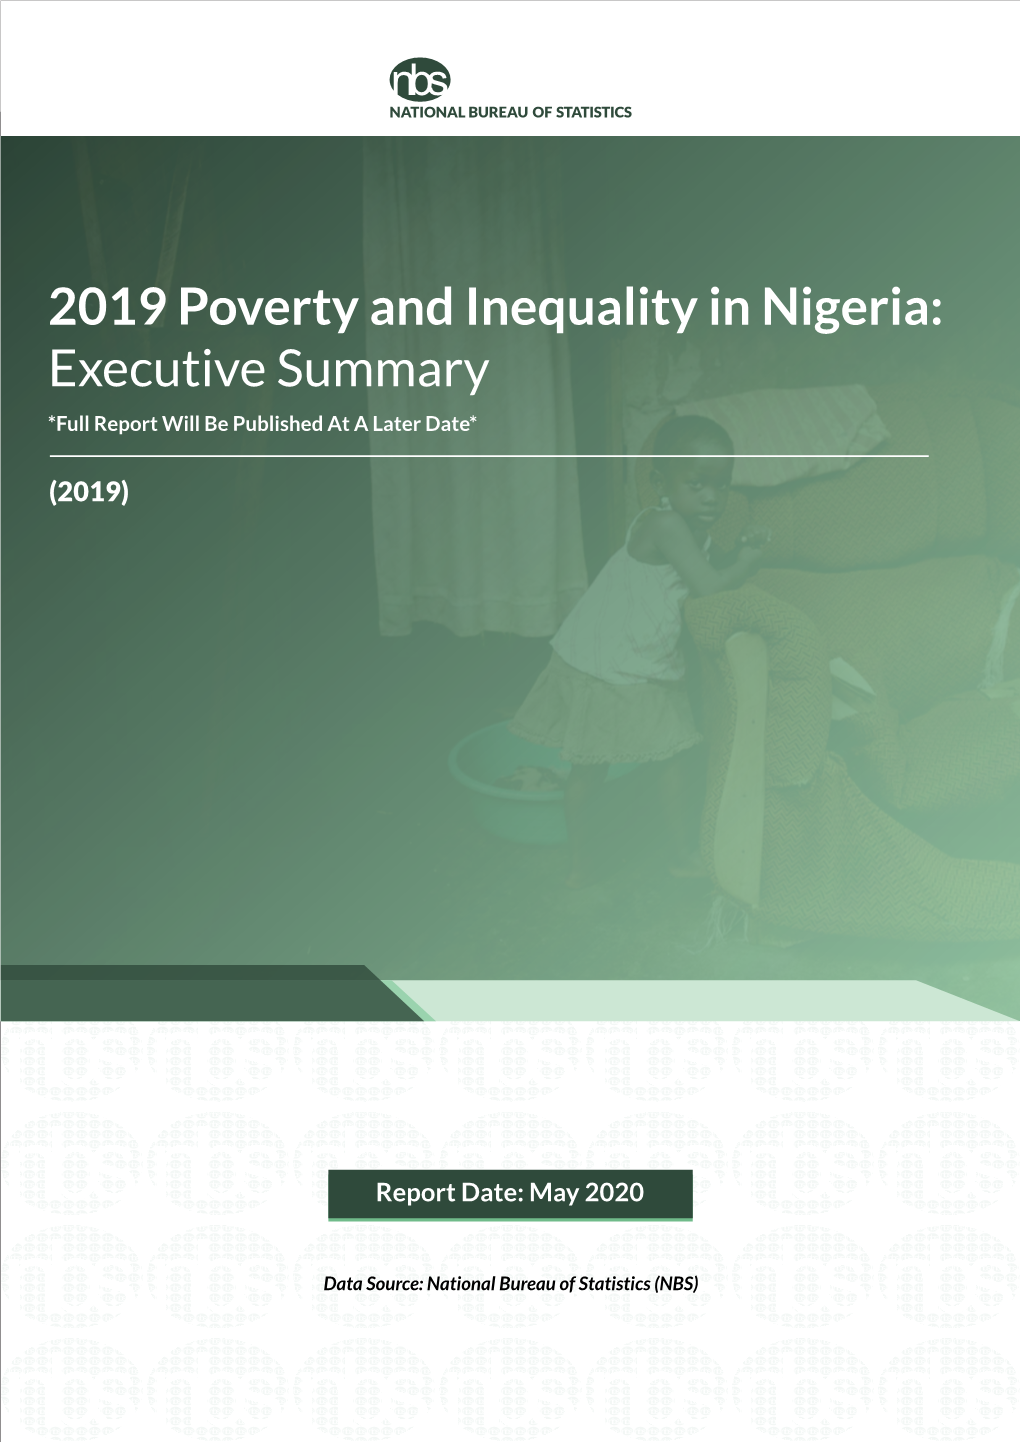 2019 Poverty and Inequality in Nigeria: Executive Summary *Full Report Will Be Published at a Later Date*